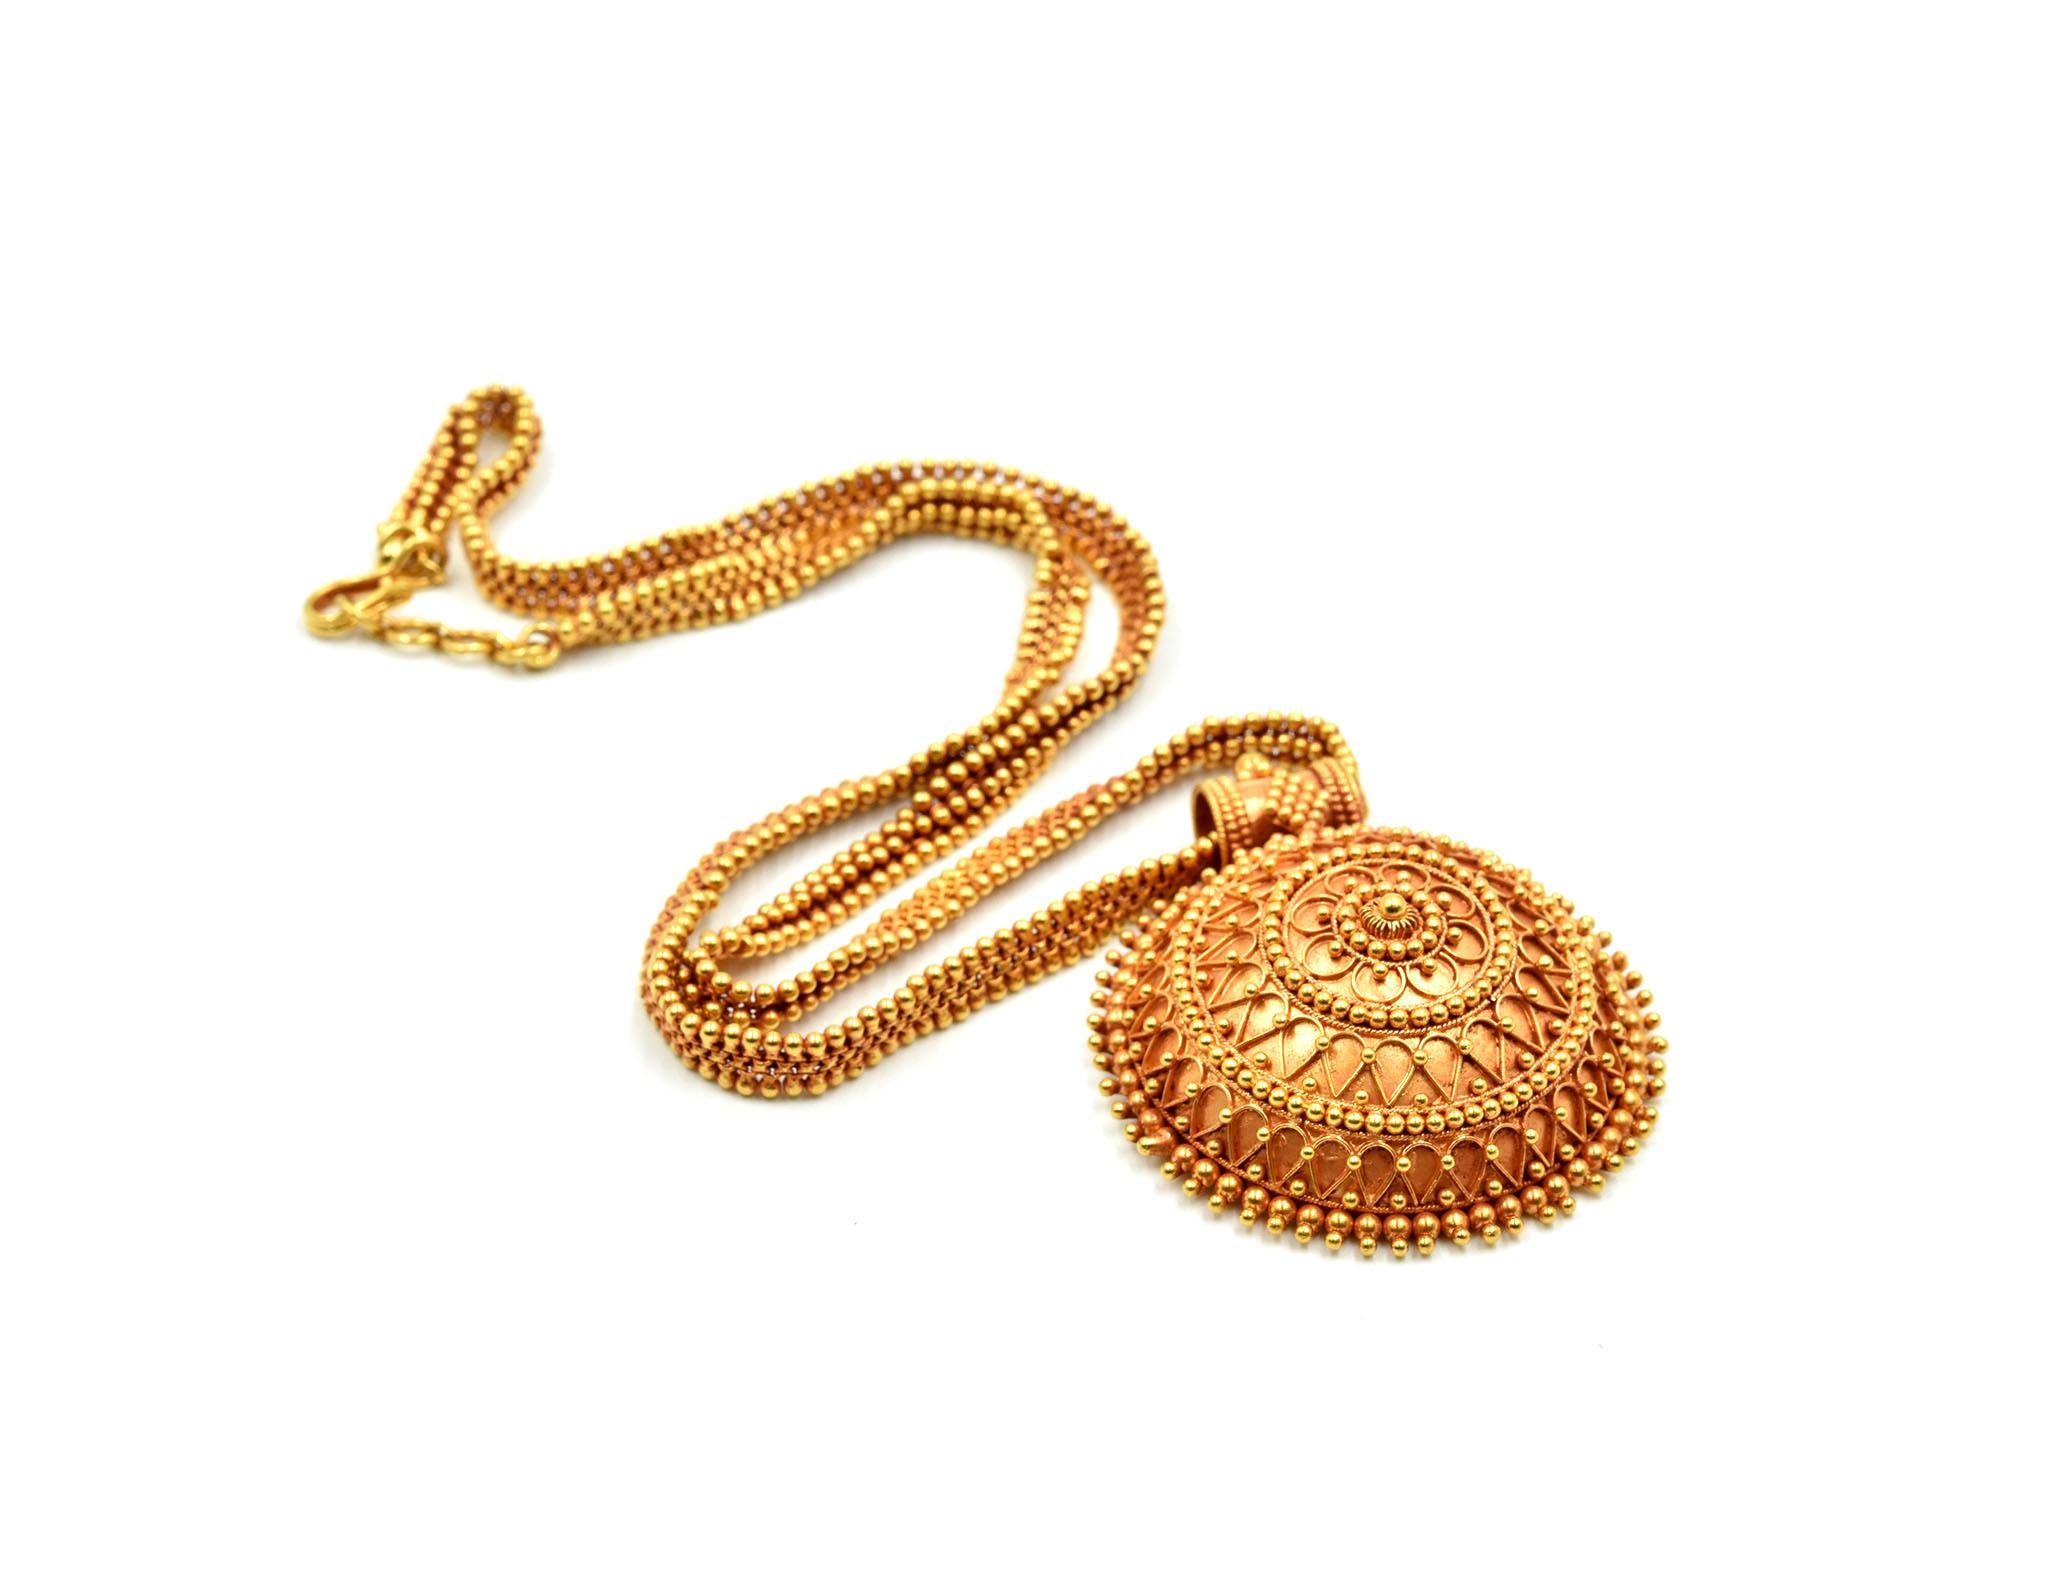 This 20” inch necklace is mounted with a beautiful India style domed pendant! The necklace and pendant are designed in 22k yellow gold with a granulated texture. The necklace consists of granulated 22k yellow gold beads in three rows, once the